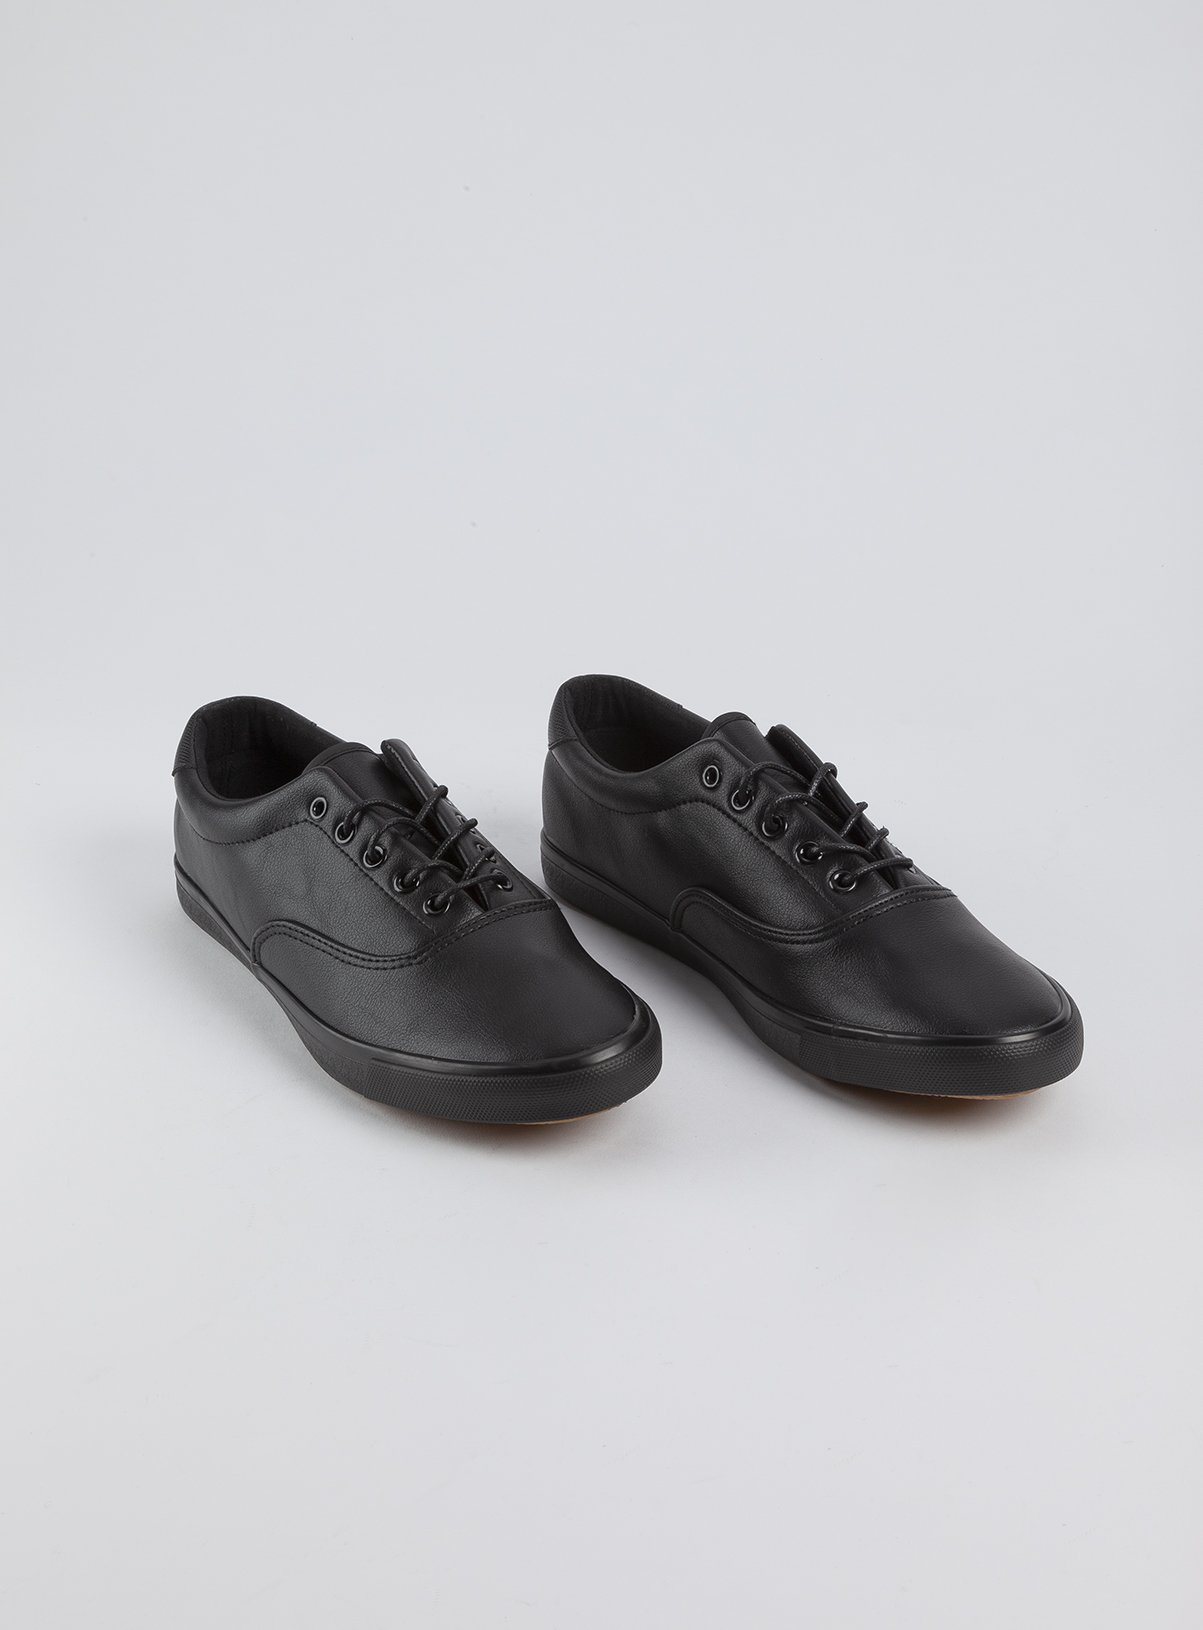 comfortable black trainers for work